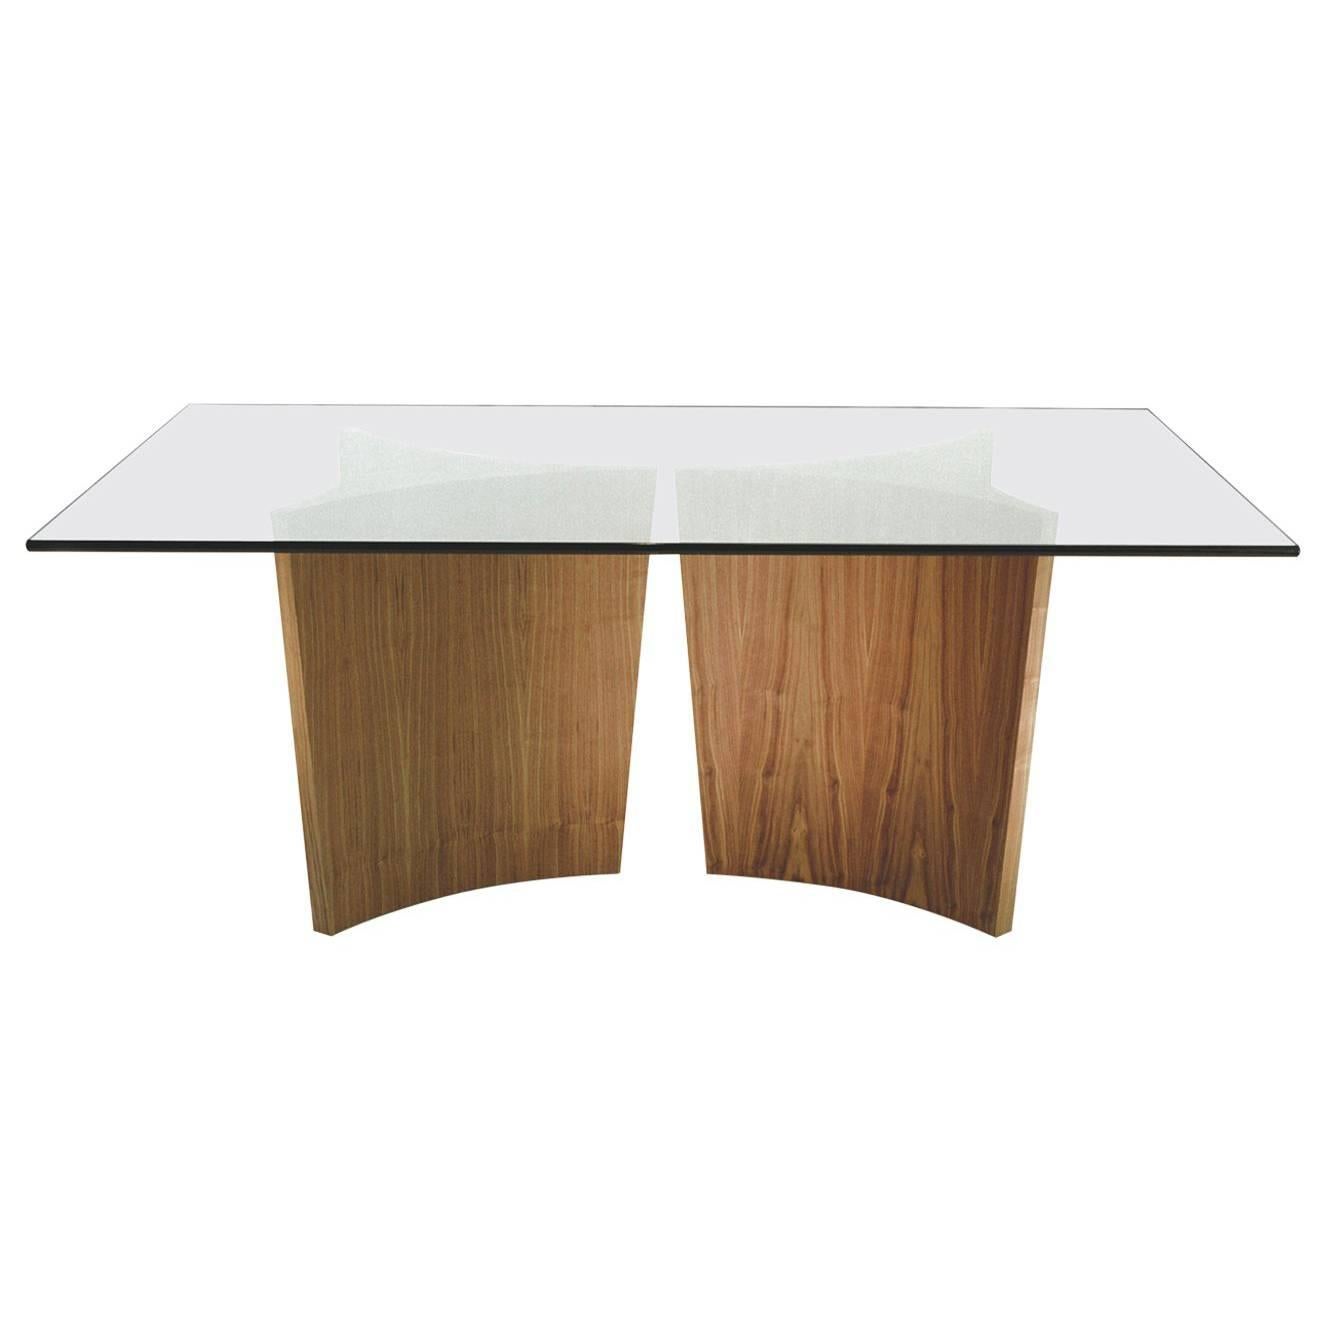 William Earle Viceroy Tapered Dining Table Base, Pair